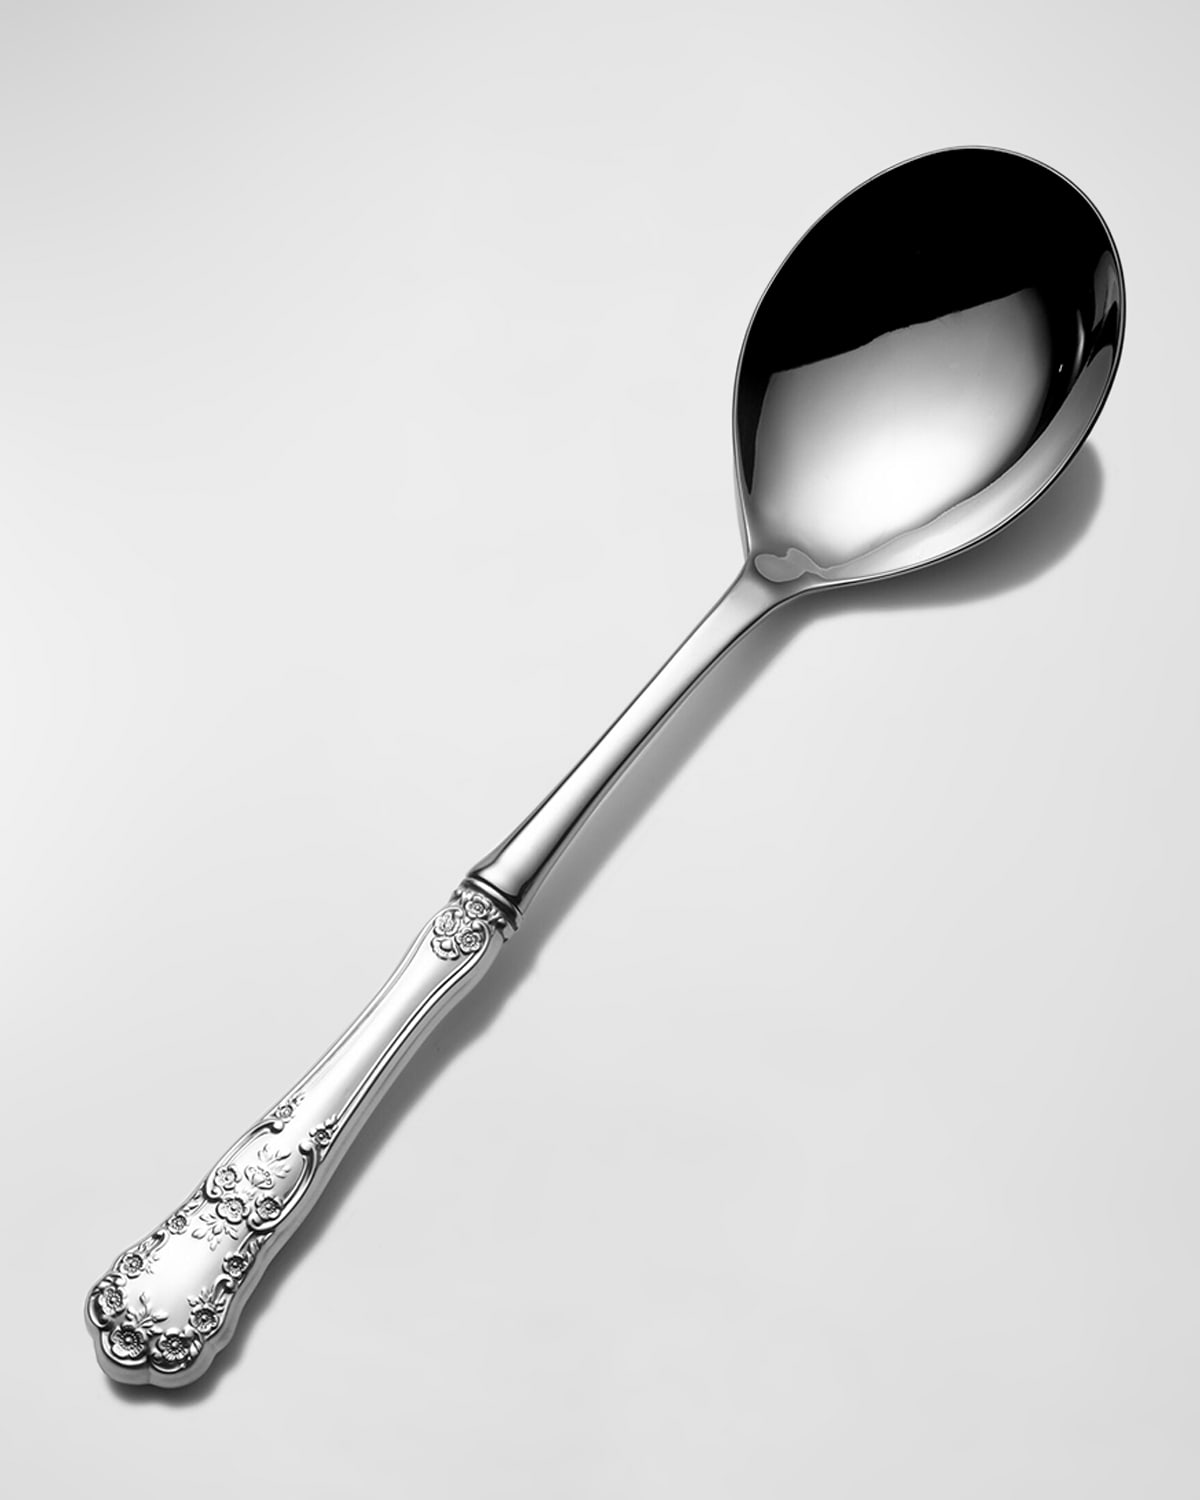 Buttercup Salad Serving Spoon, Hollow Handle